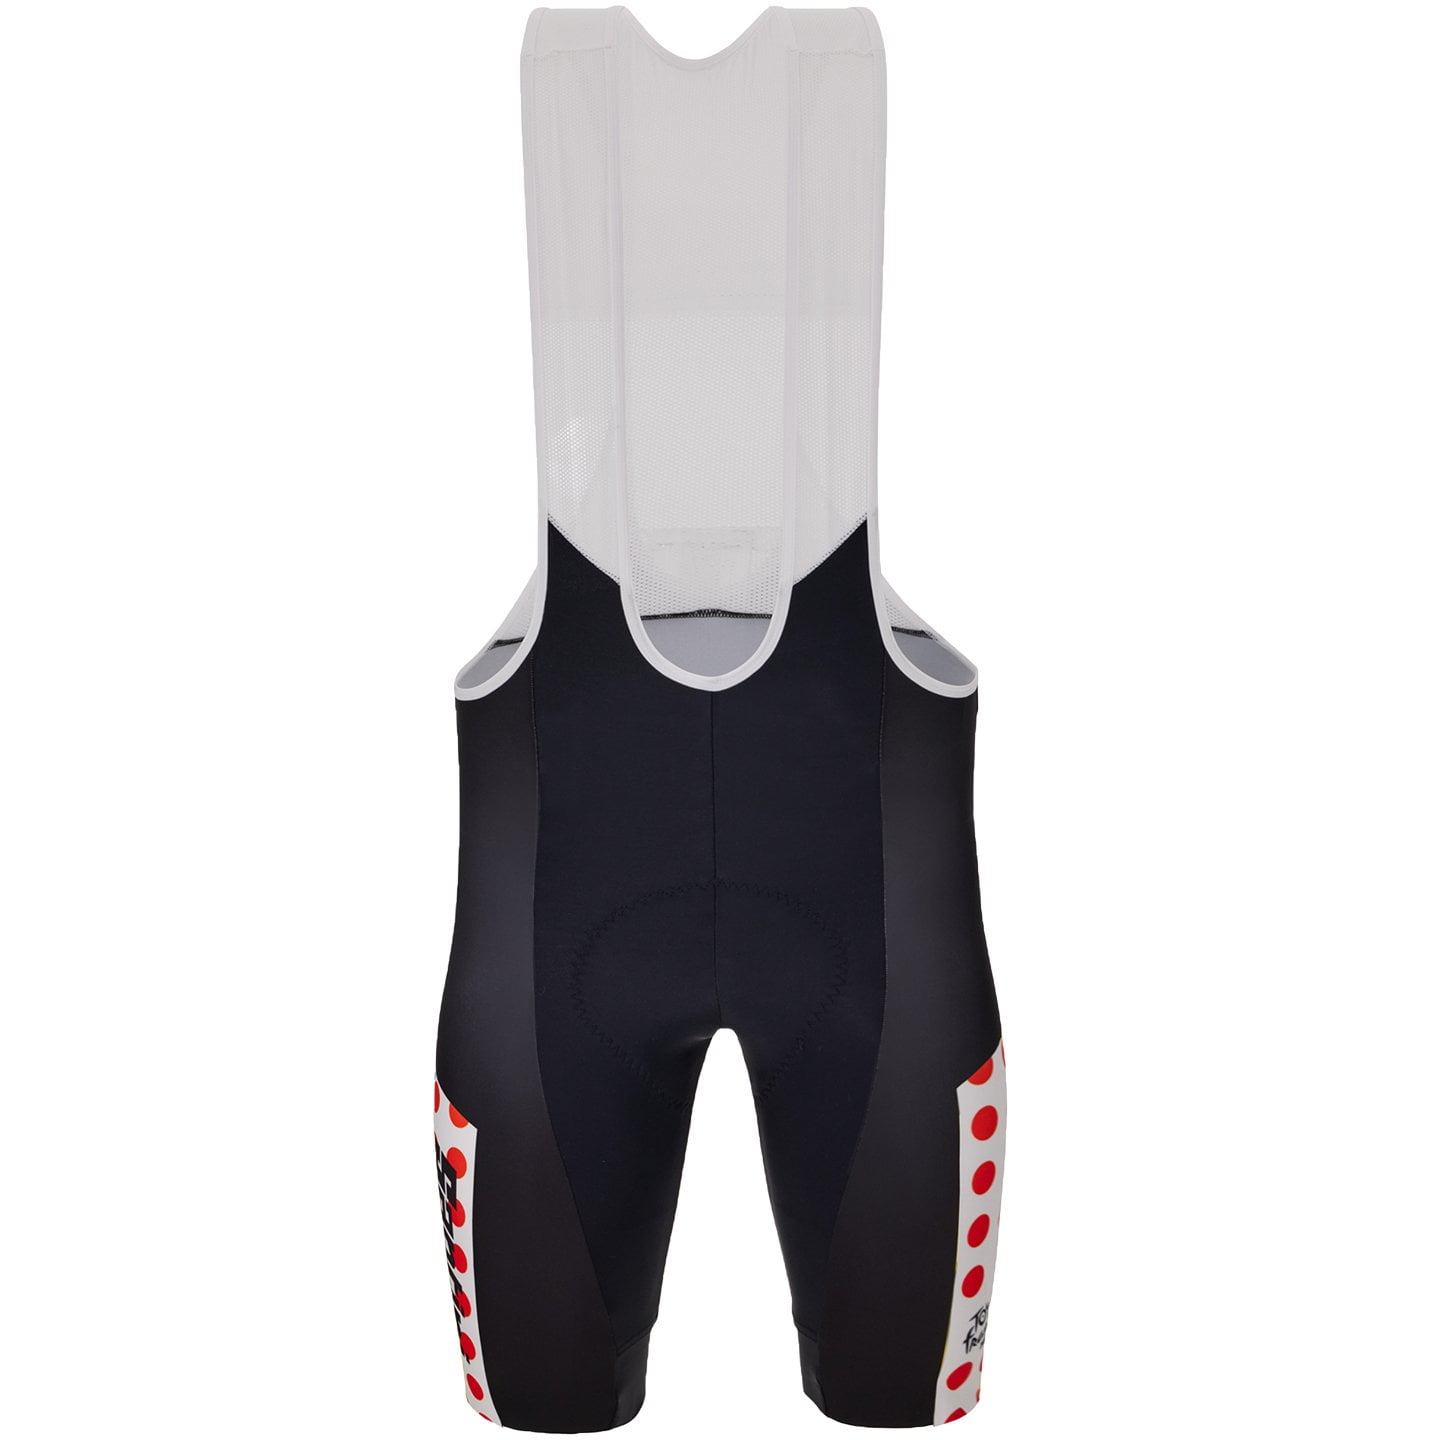 TOUR DE FRANCE GPM Leader 2024 Bib Shorts, for men, size L, Cycle shorts, Cycling clothing